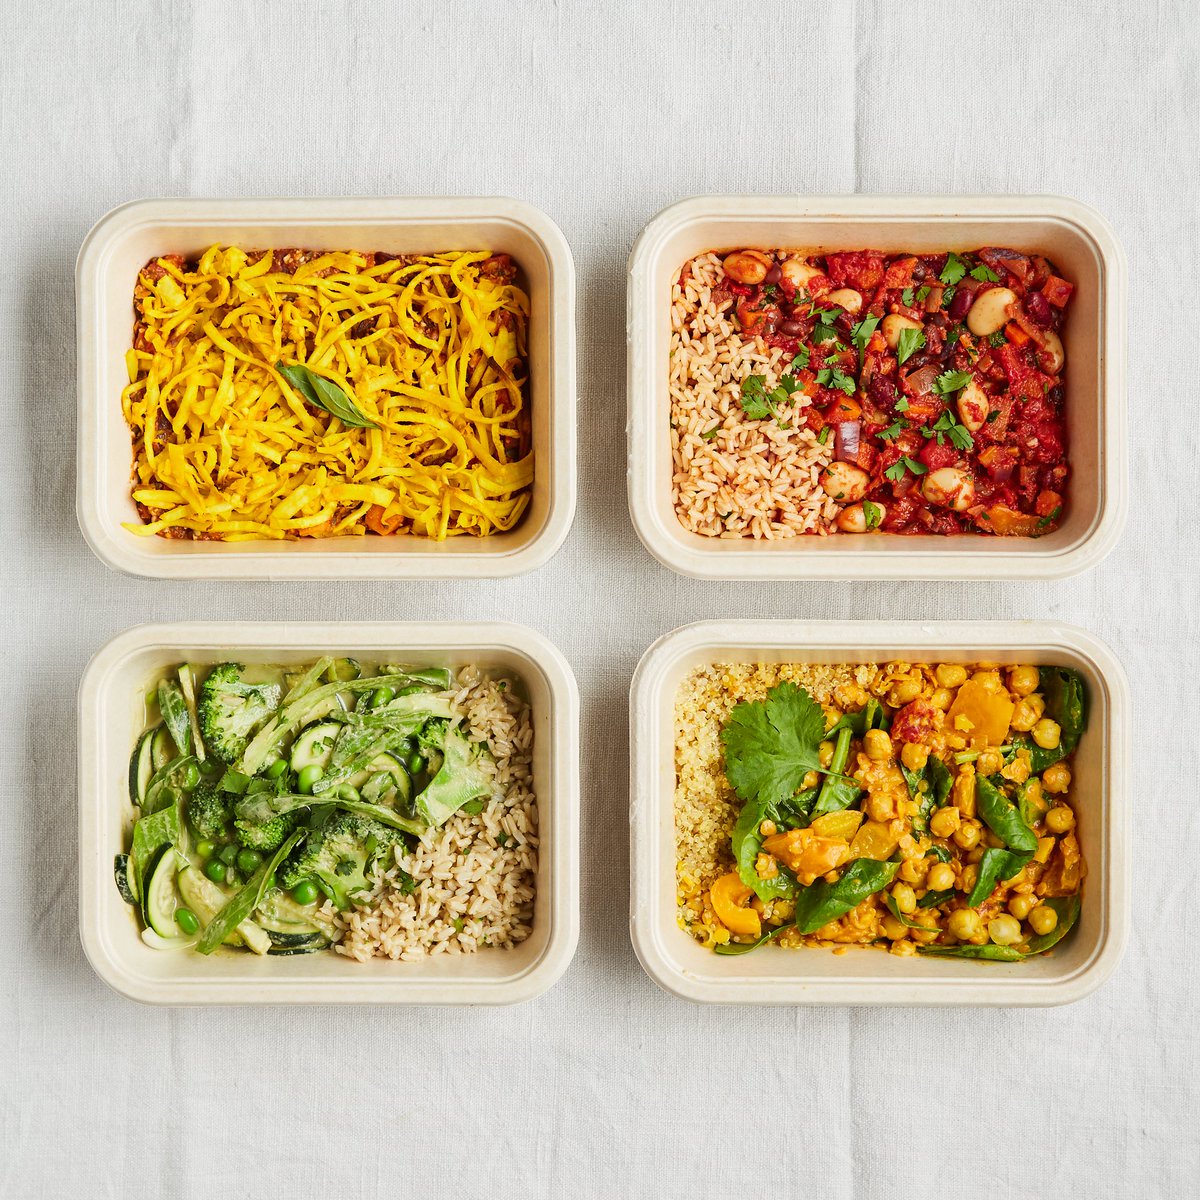 HELLO NEW VEGAN READY MEAL RANGE, in all @planetorganicuk & @AsNatureInt stores from TODAY! Shepherdless Pie, 3 Bean Chilli, Coconut Dal & Thai Green Veg Curry. We’re determined to change the status quo when it comes to ready meals because they CAN be super nutritious & delicious